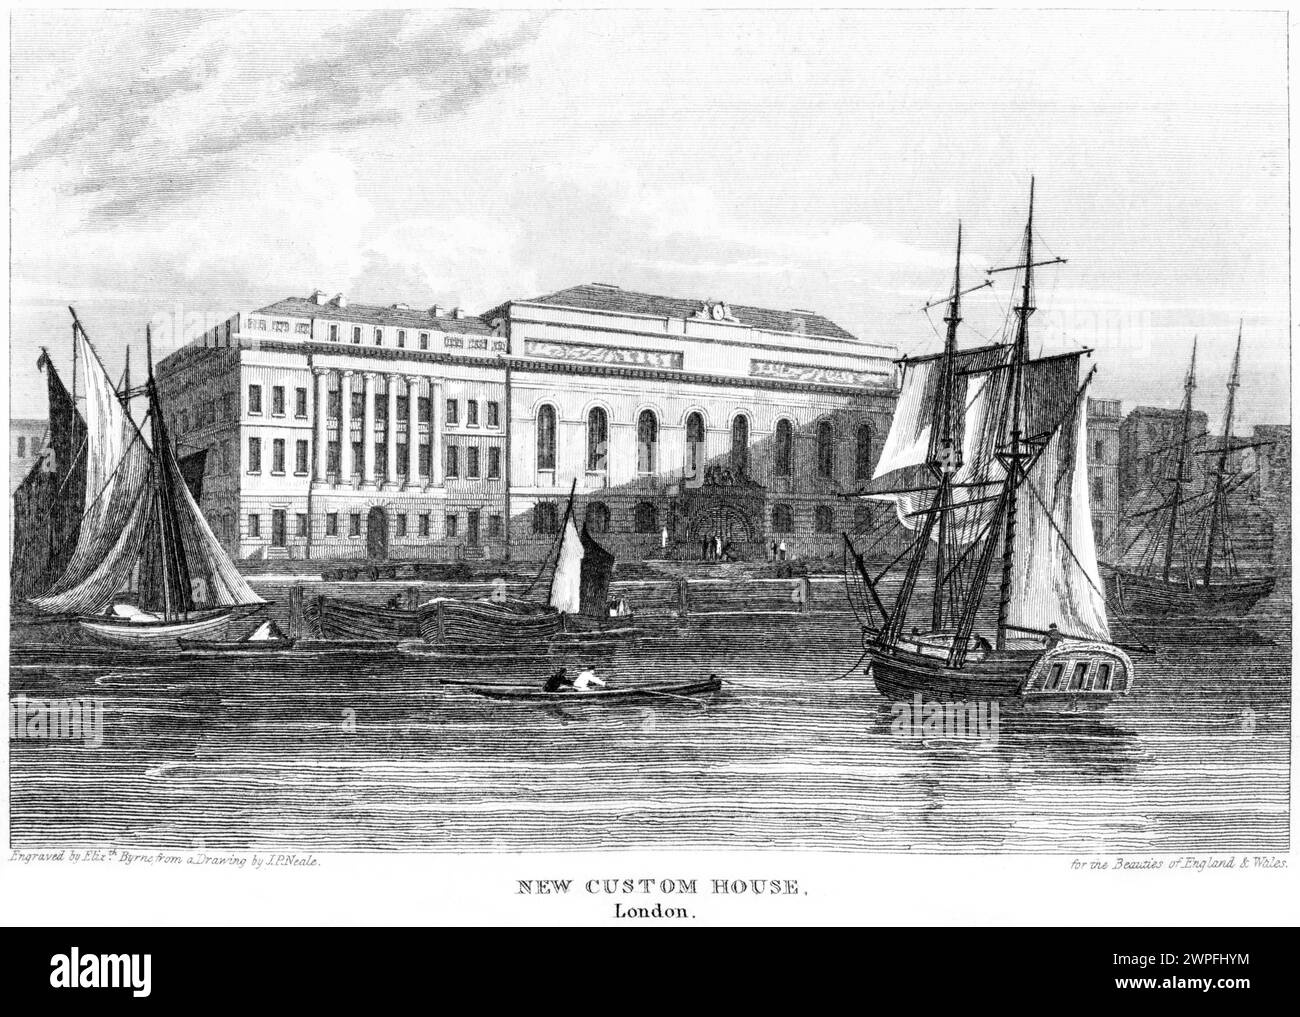 An engraving entitled New Custom House, London (Southwark Bridge) UK scanned at high resolution from a book published around 1815. Stock Photo